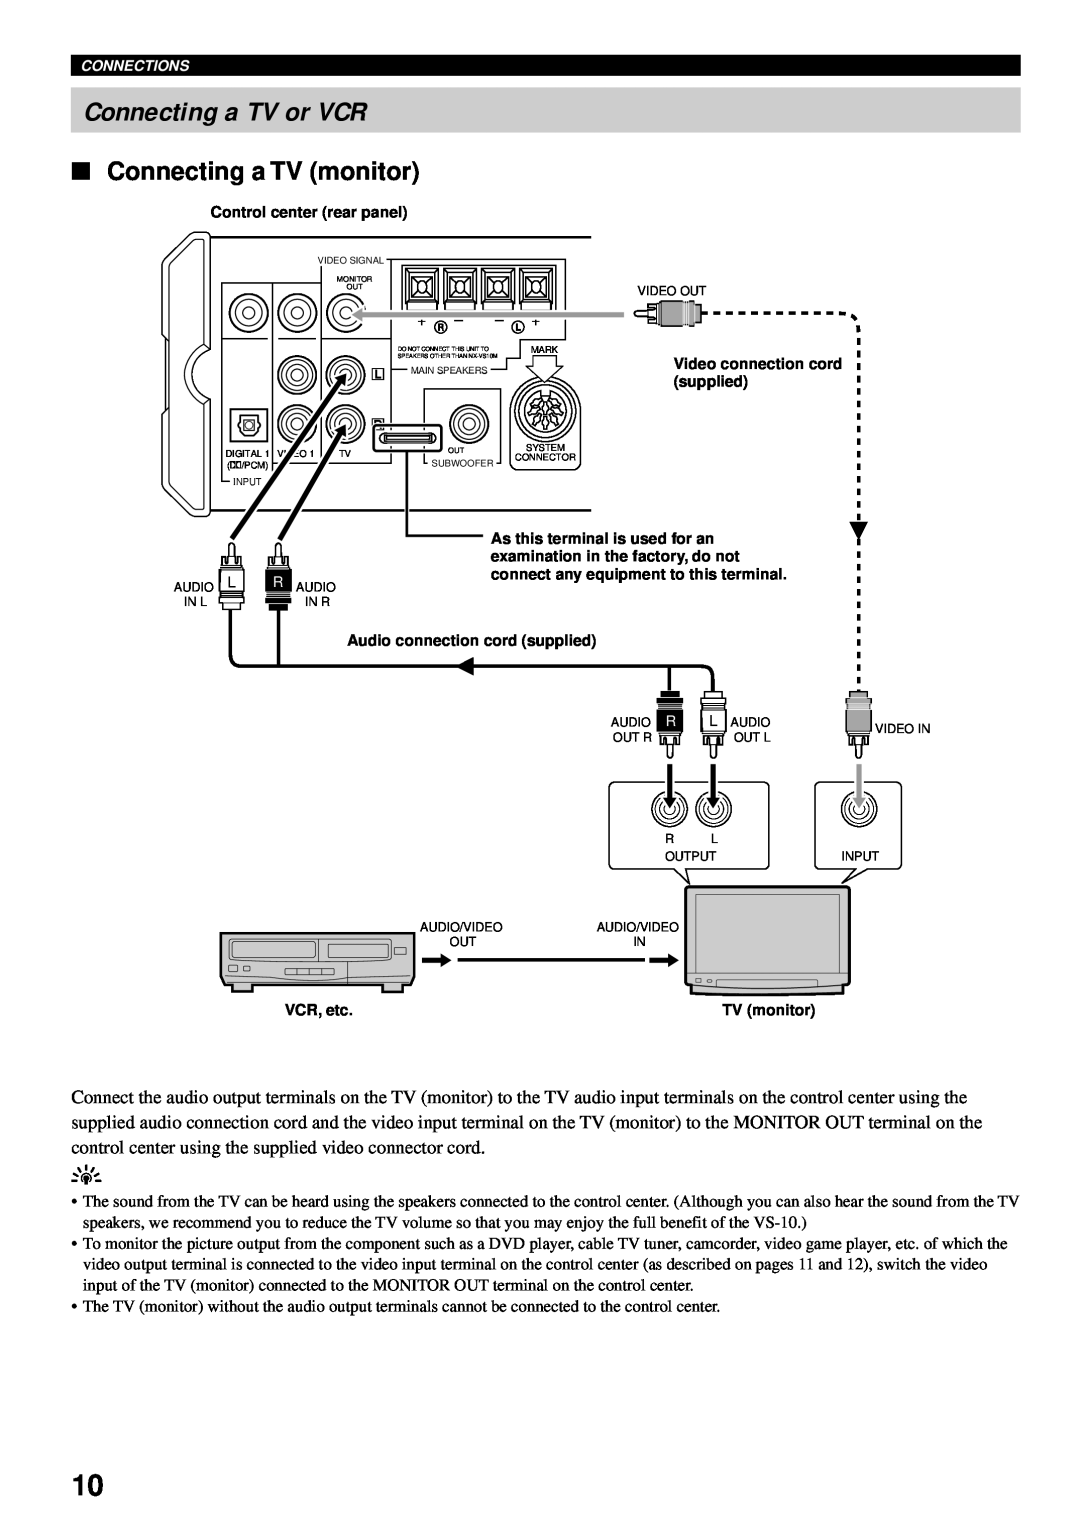 Yamaha VS-10 owner manual Connecting a TV or VCR, Connecting a TV monitor 